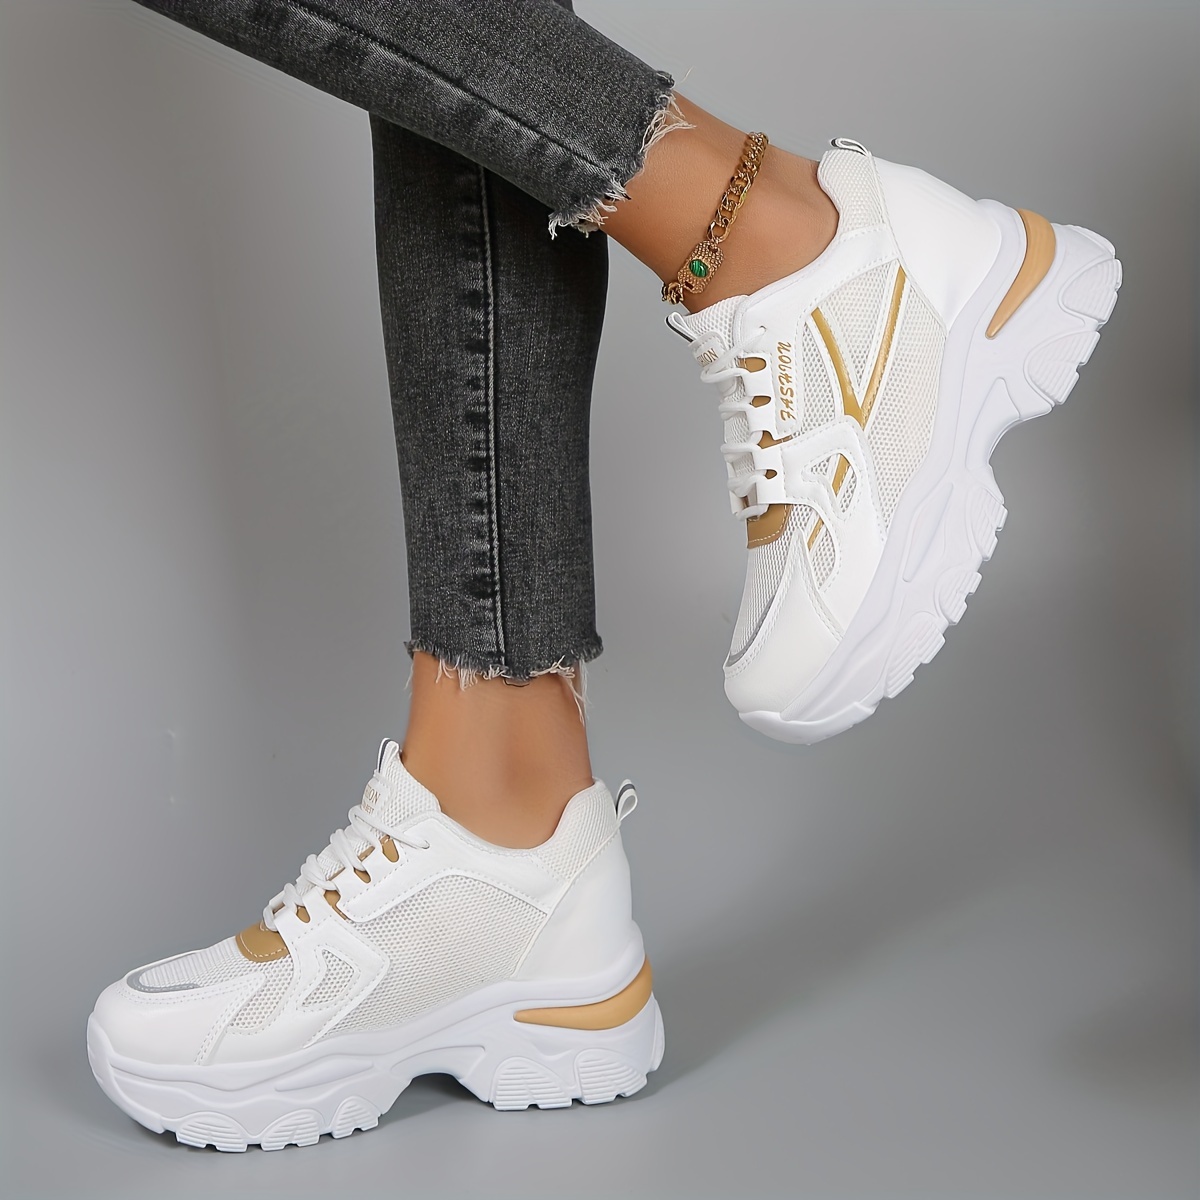 

Women's Fashion Chunky Platform Sneakers, Breathable Height-increasing Casual Sports Shoes, Lace-up Sporty Trainers